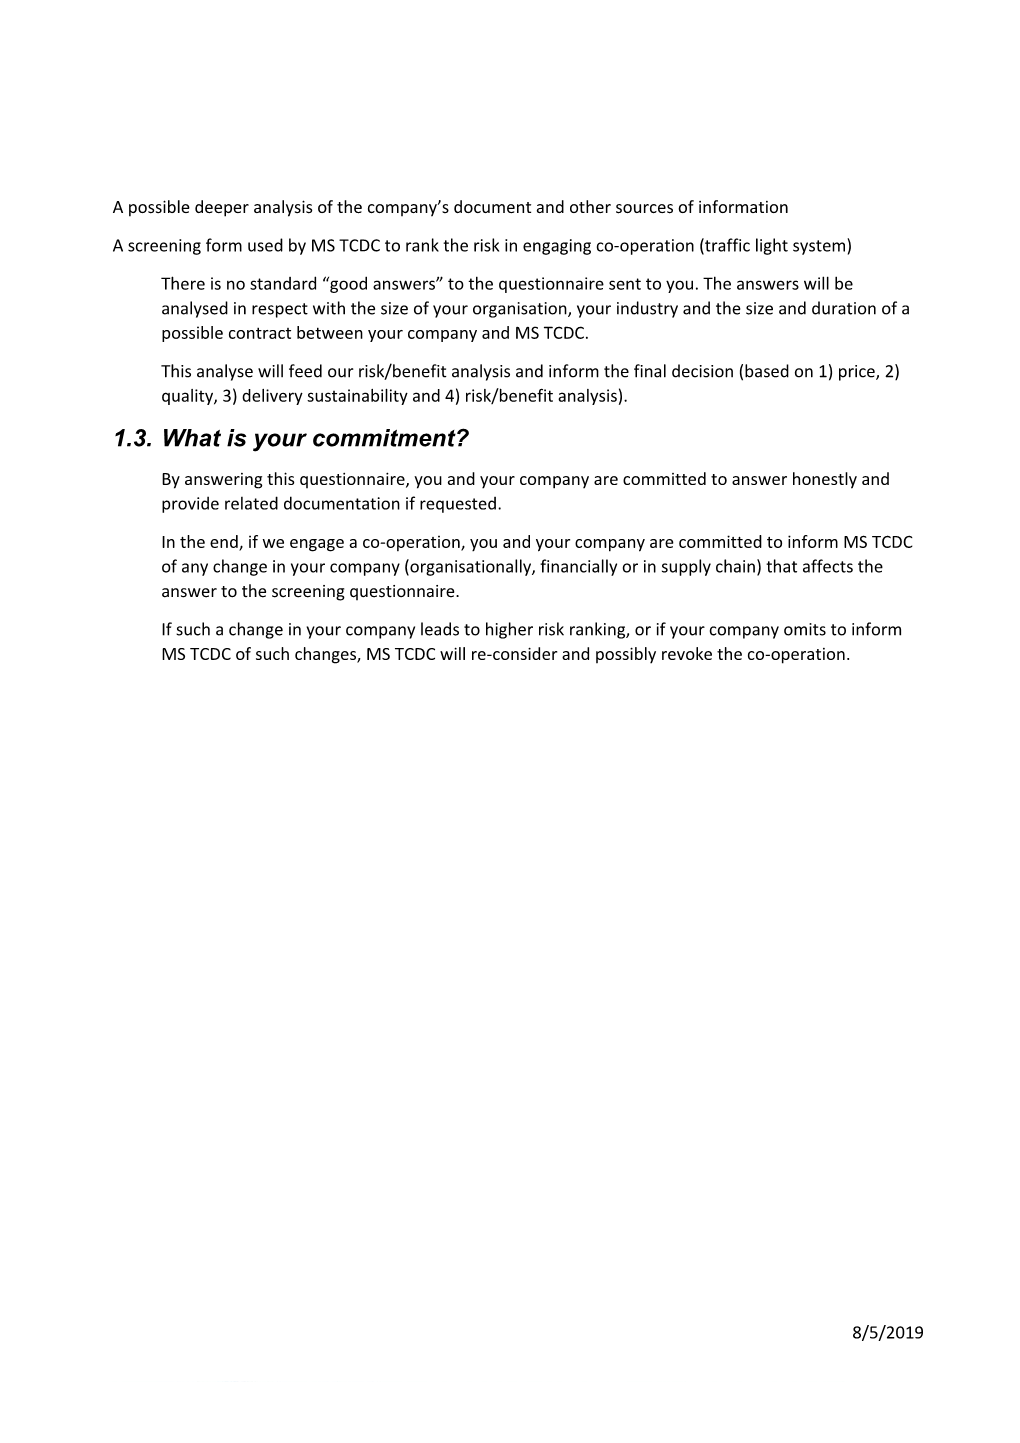 Corporate Engagement Screening Questionnaire